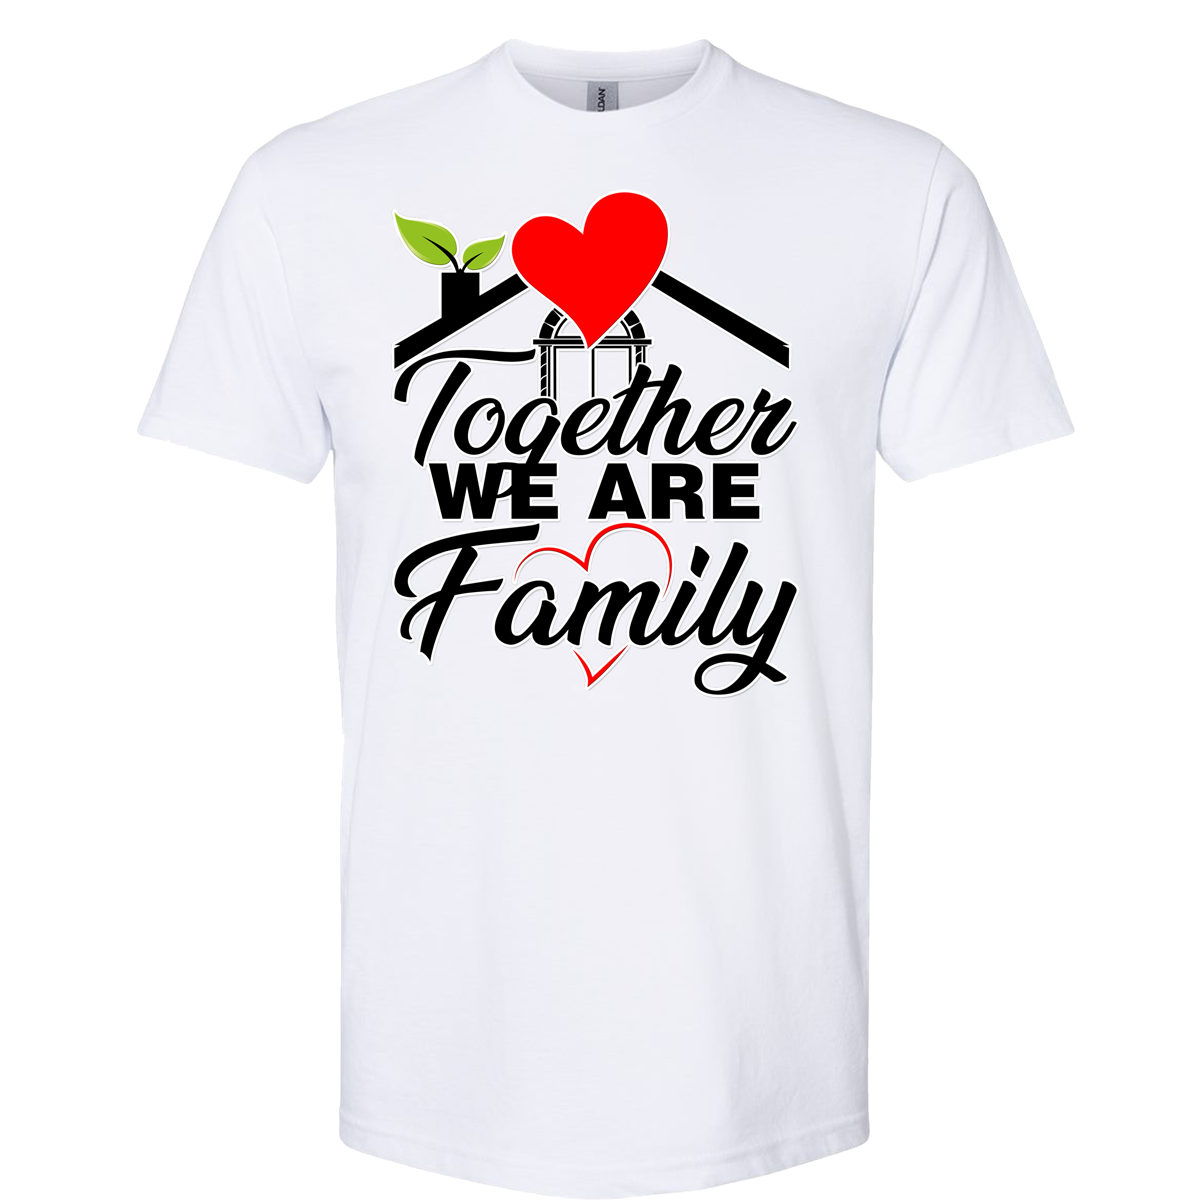 Together we are family T-Shirt - Wilson Design Group